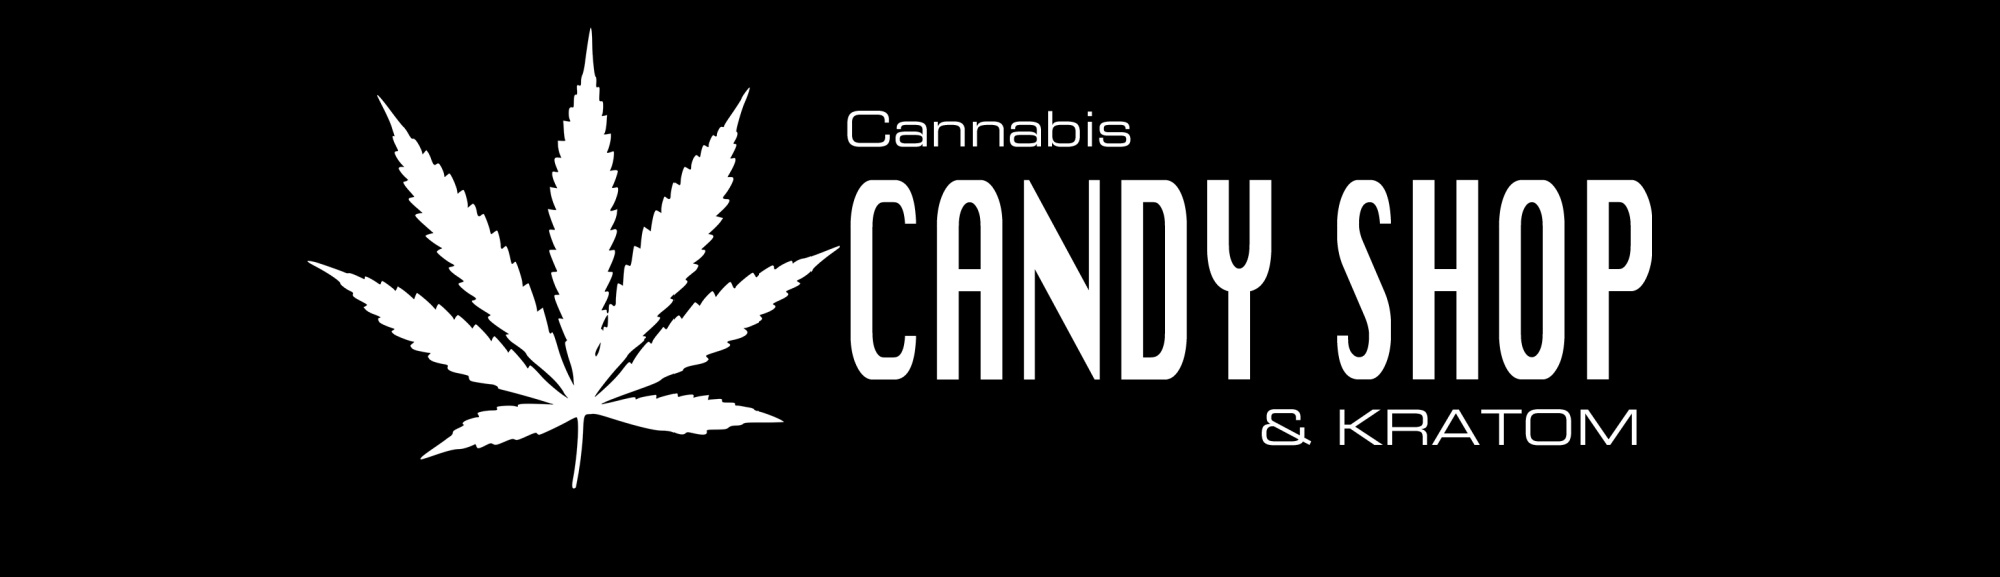 image of cannabis candy shop & kratom 